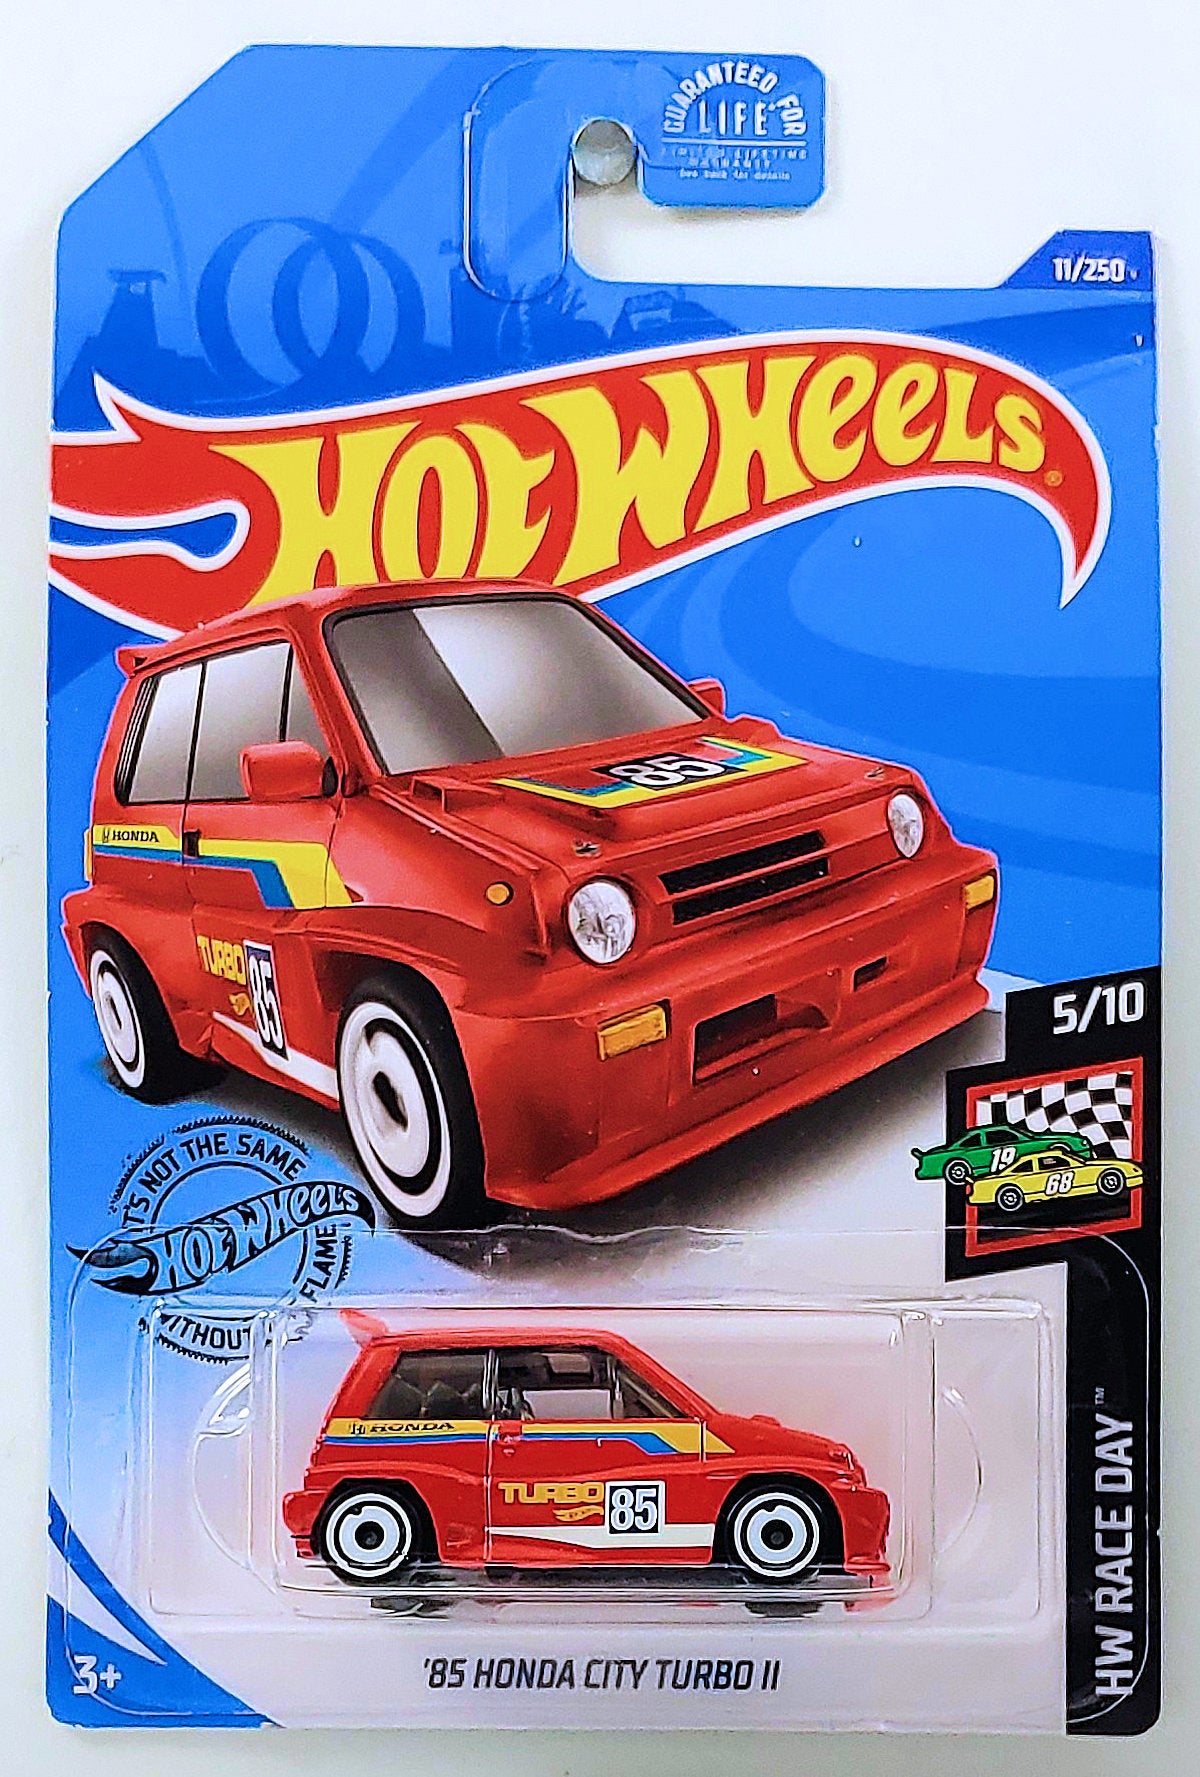 Hot Wheels 2020 - Collector # 011/250 - HW Race Day 5/10 - '85 Honda City Turbo II - Red